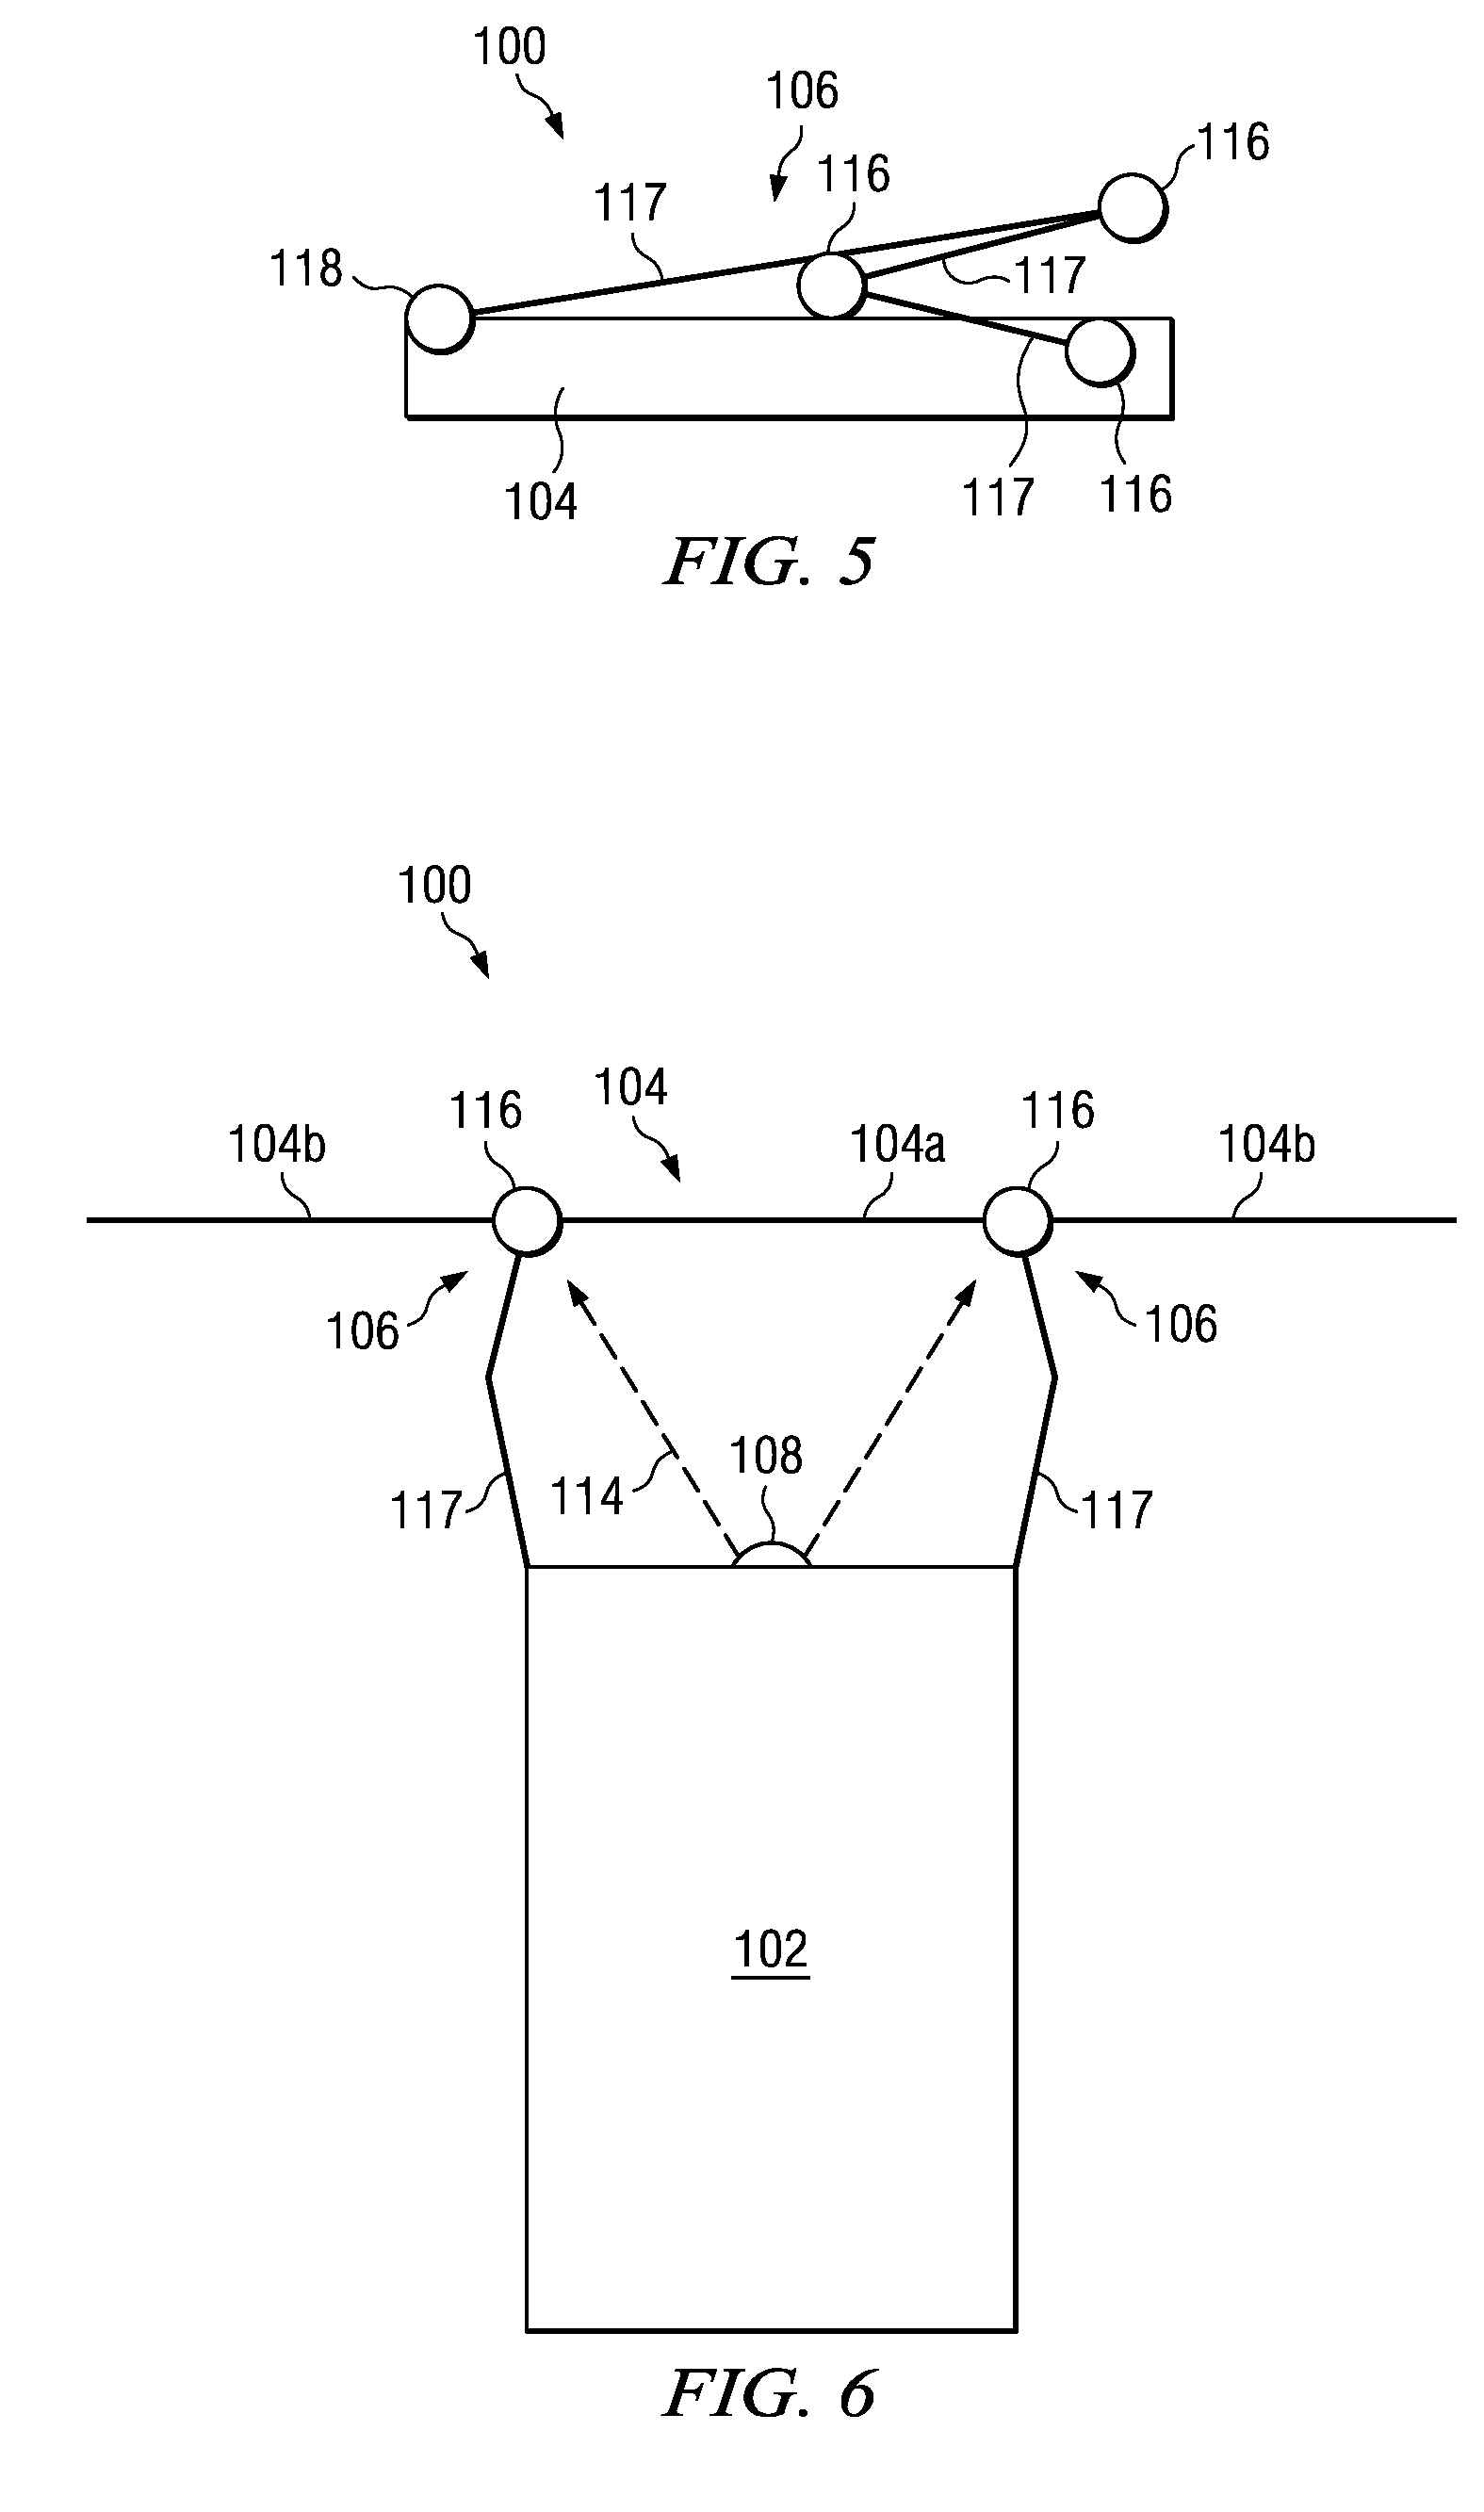 Display Systems and Methods for Mobile Devices